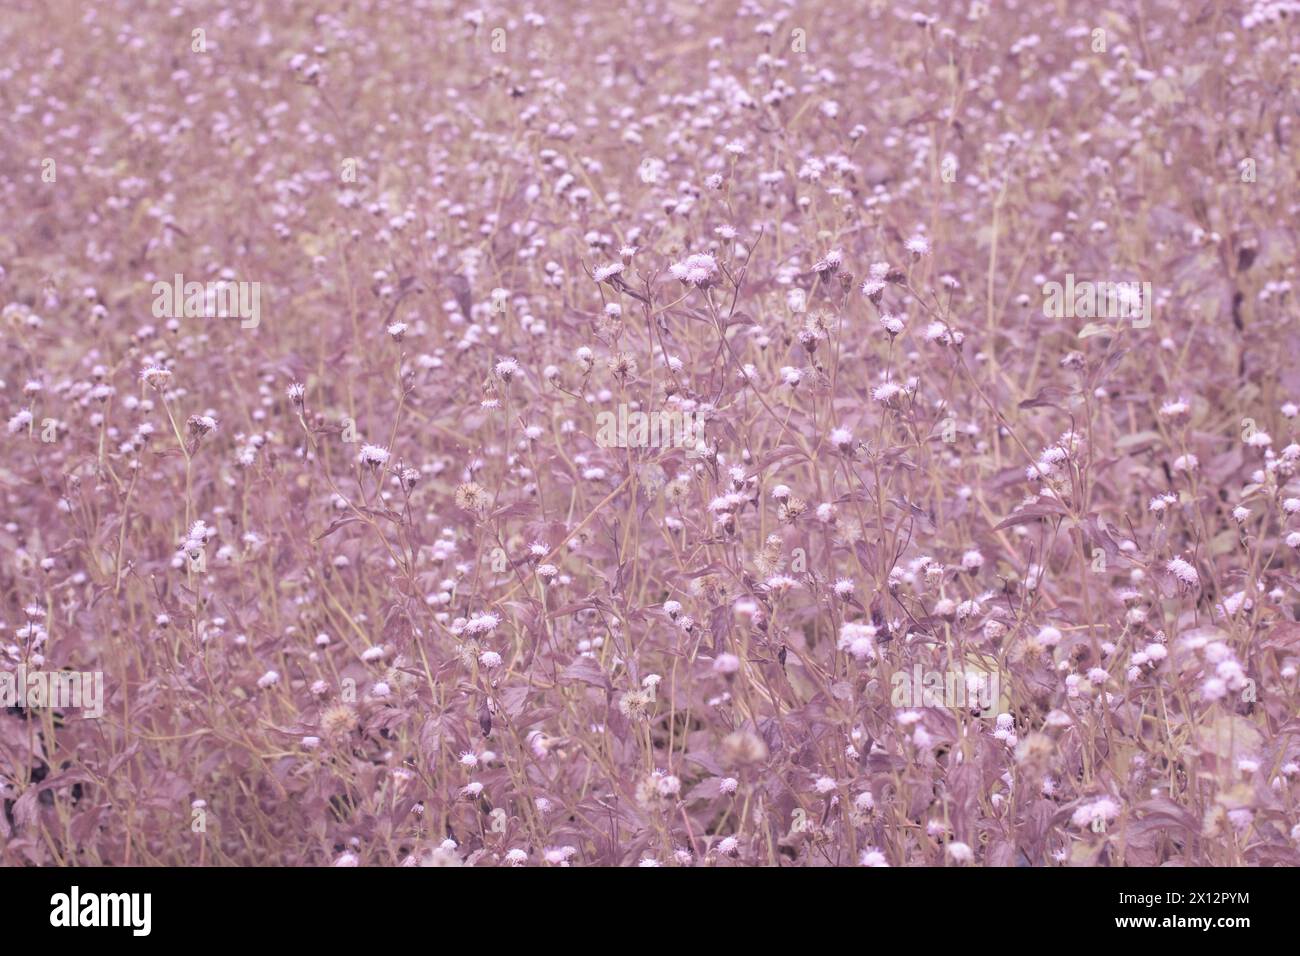 infrared image of meadow filled with tiny ageratum conyzoides weed. Stock Photo